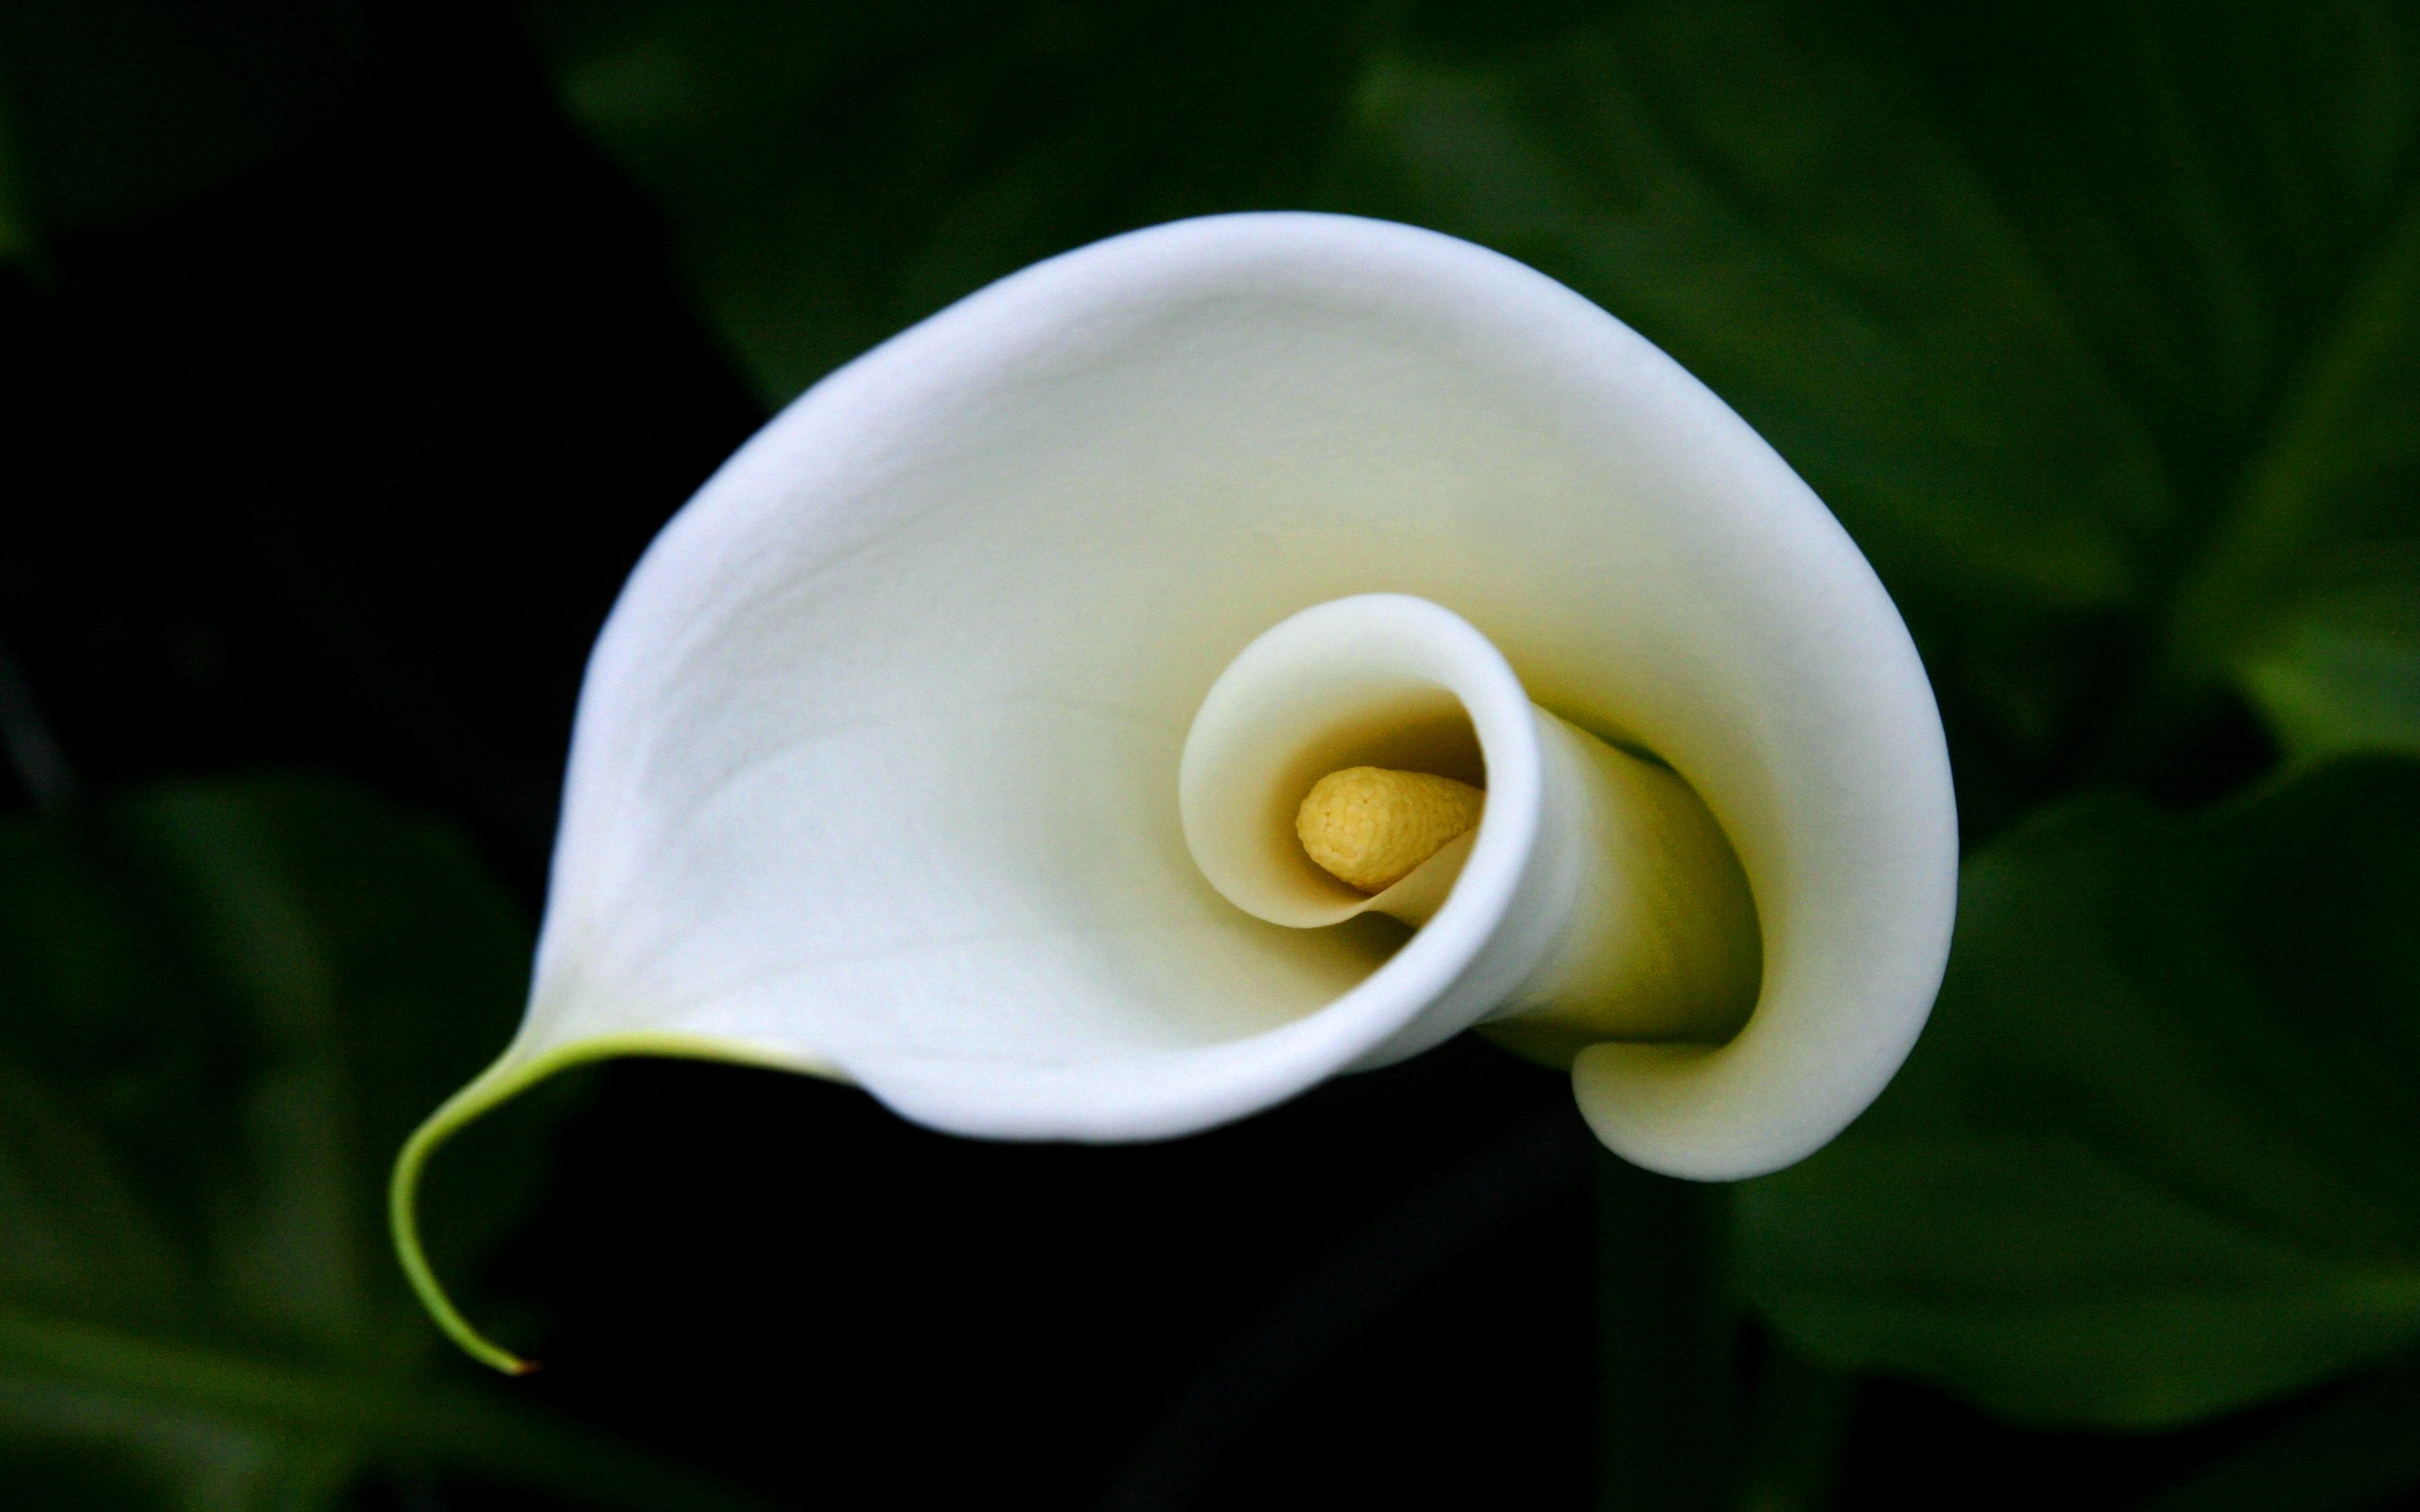 calla lily, earth High Definition image